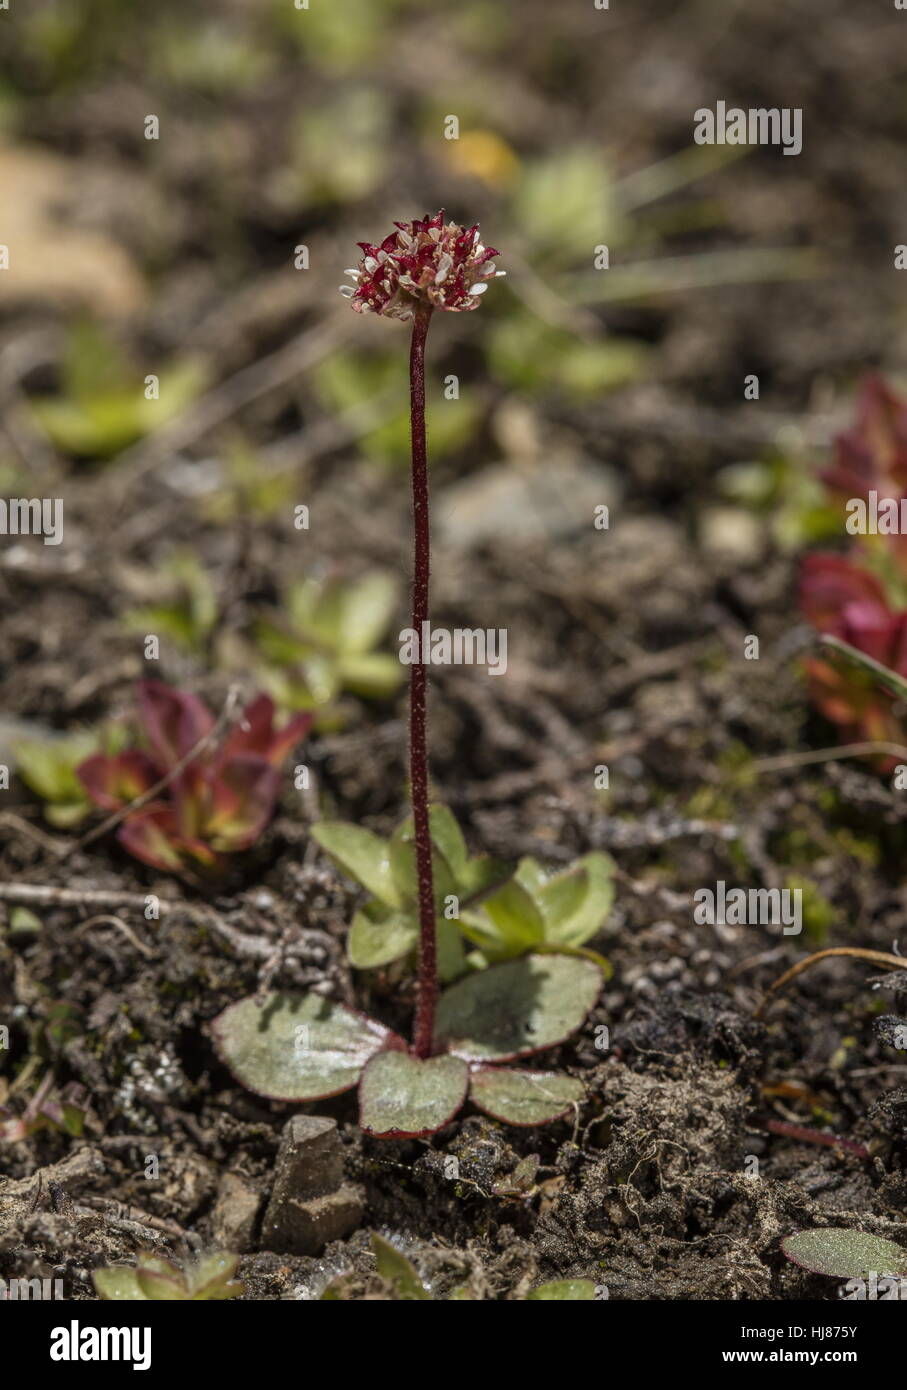 Sierra saxifrage, Micranthes aprica, in flower in high altitude snow-melt area, Sierra Nevada. Stock Photo